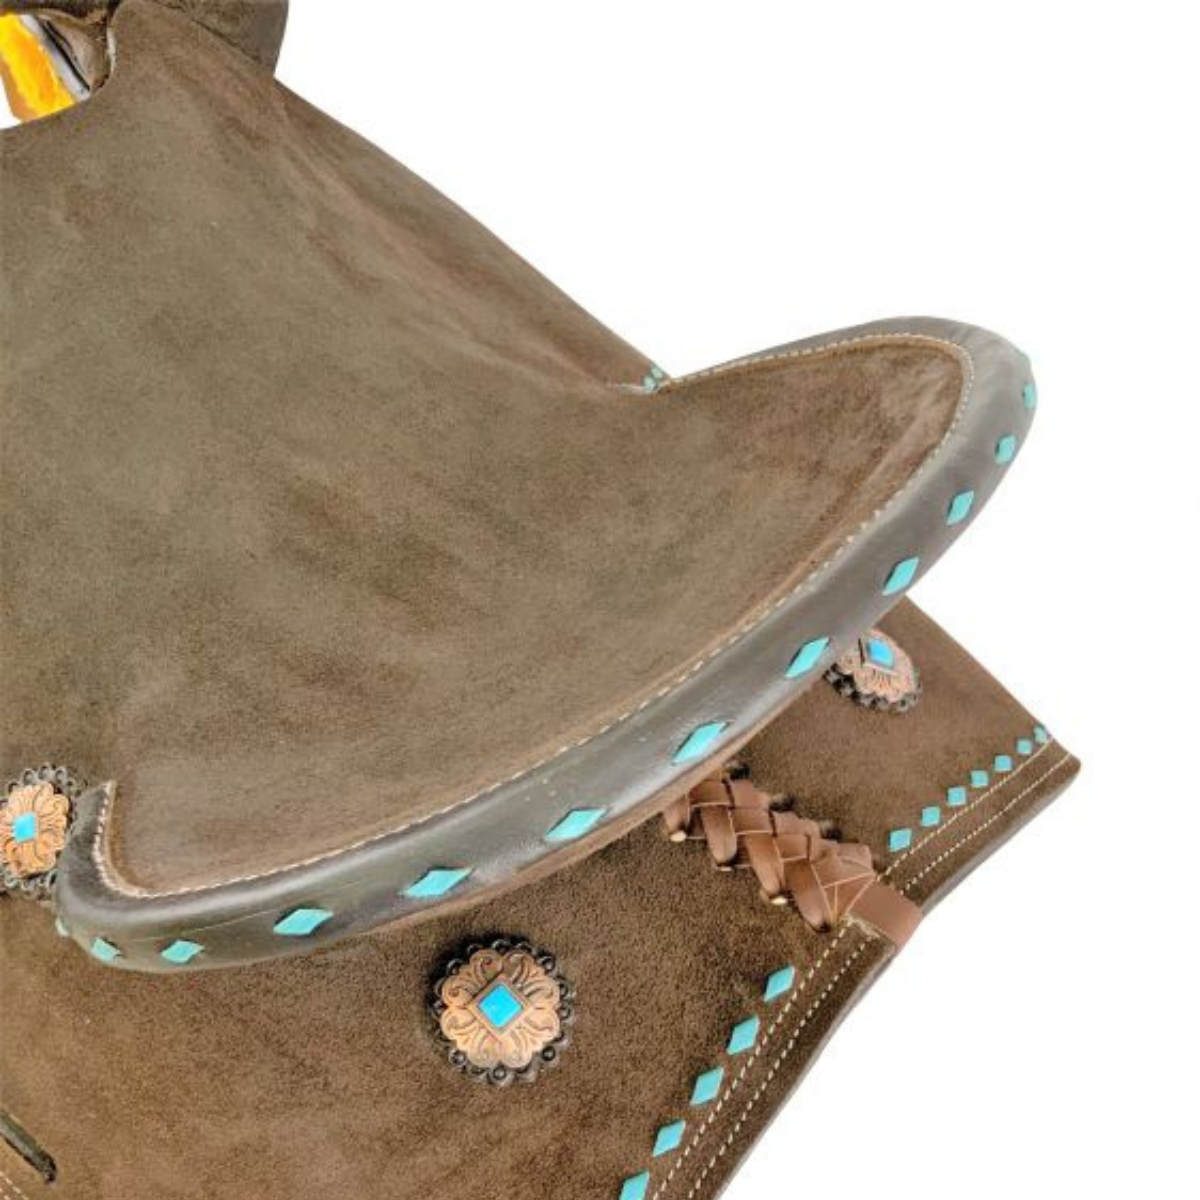 13"  DOUBLE T   BARREL STYLE SADDLE WITH OILED ROUGH OUT LEATHER, TEAL BUCKSTITCH ACCENTS AND FLOWER CONCHOS - Double T Saddles